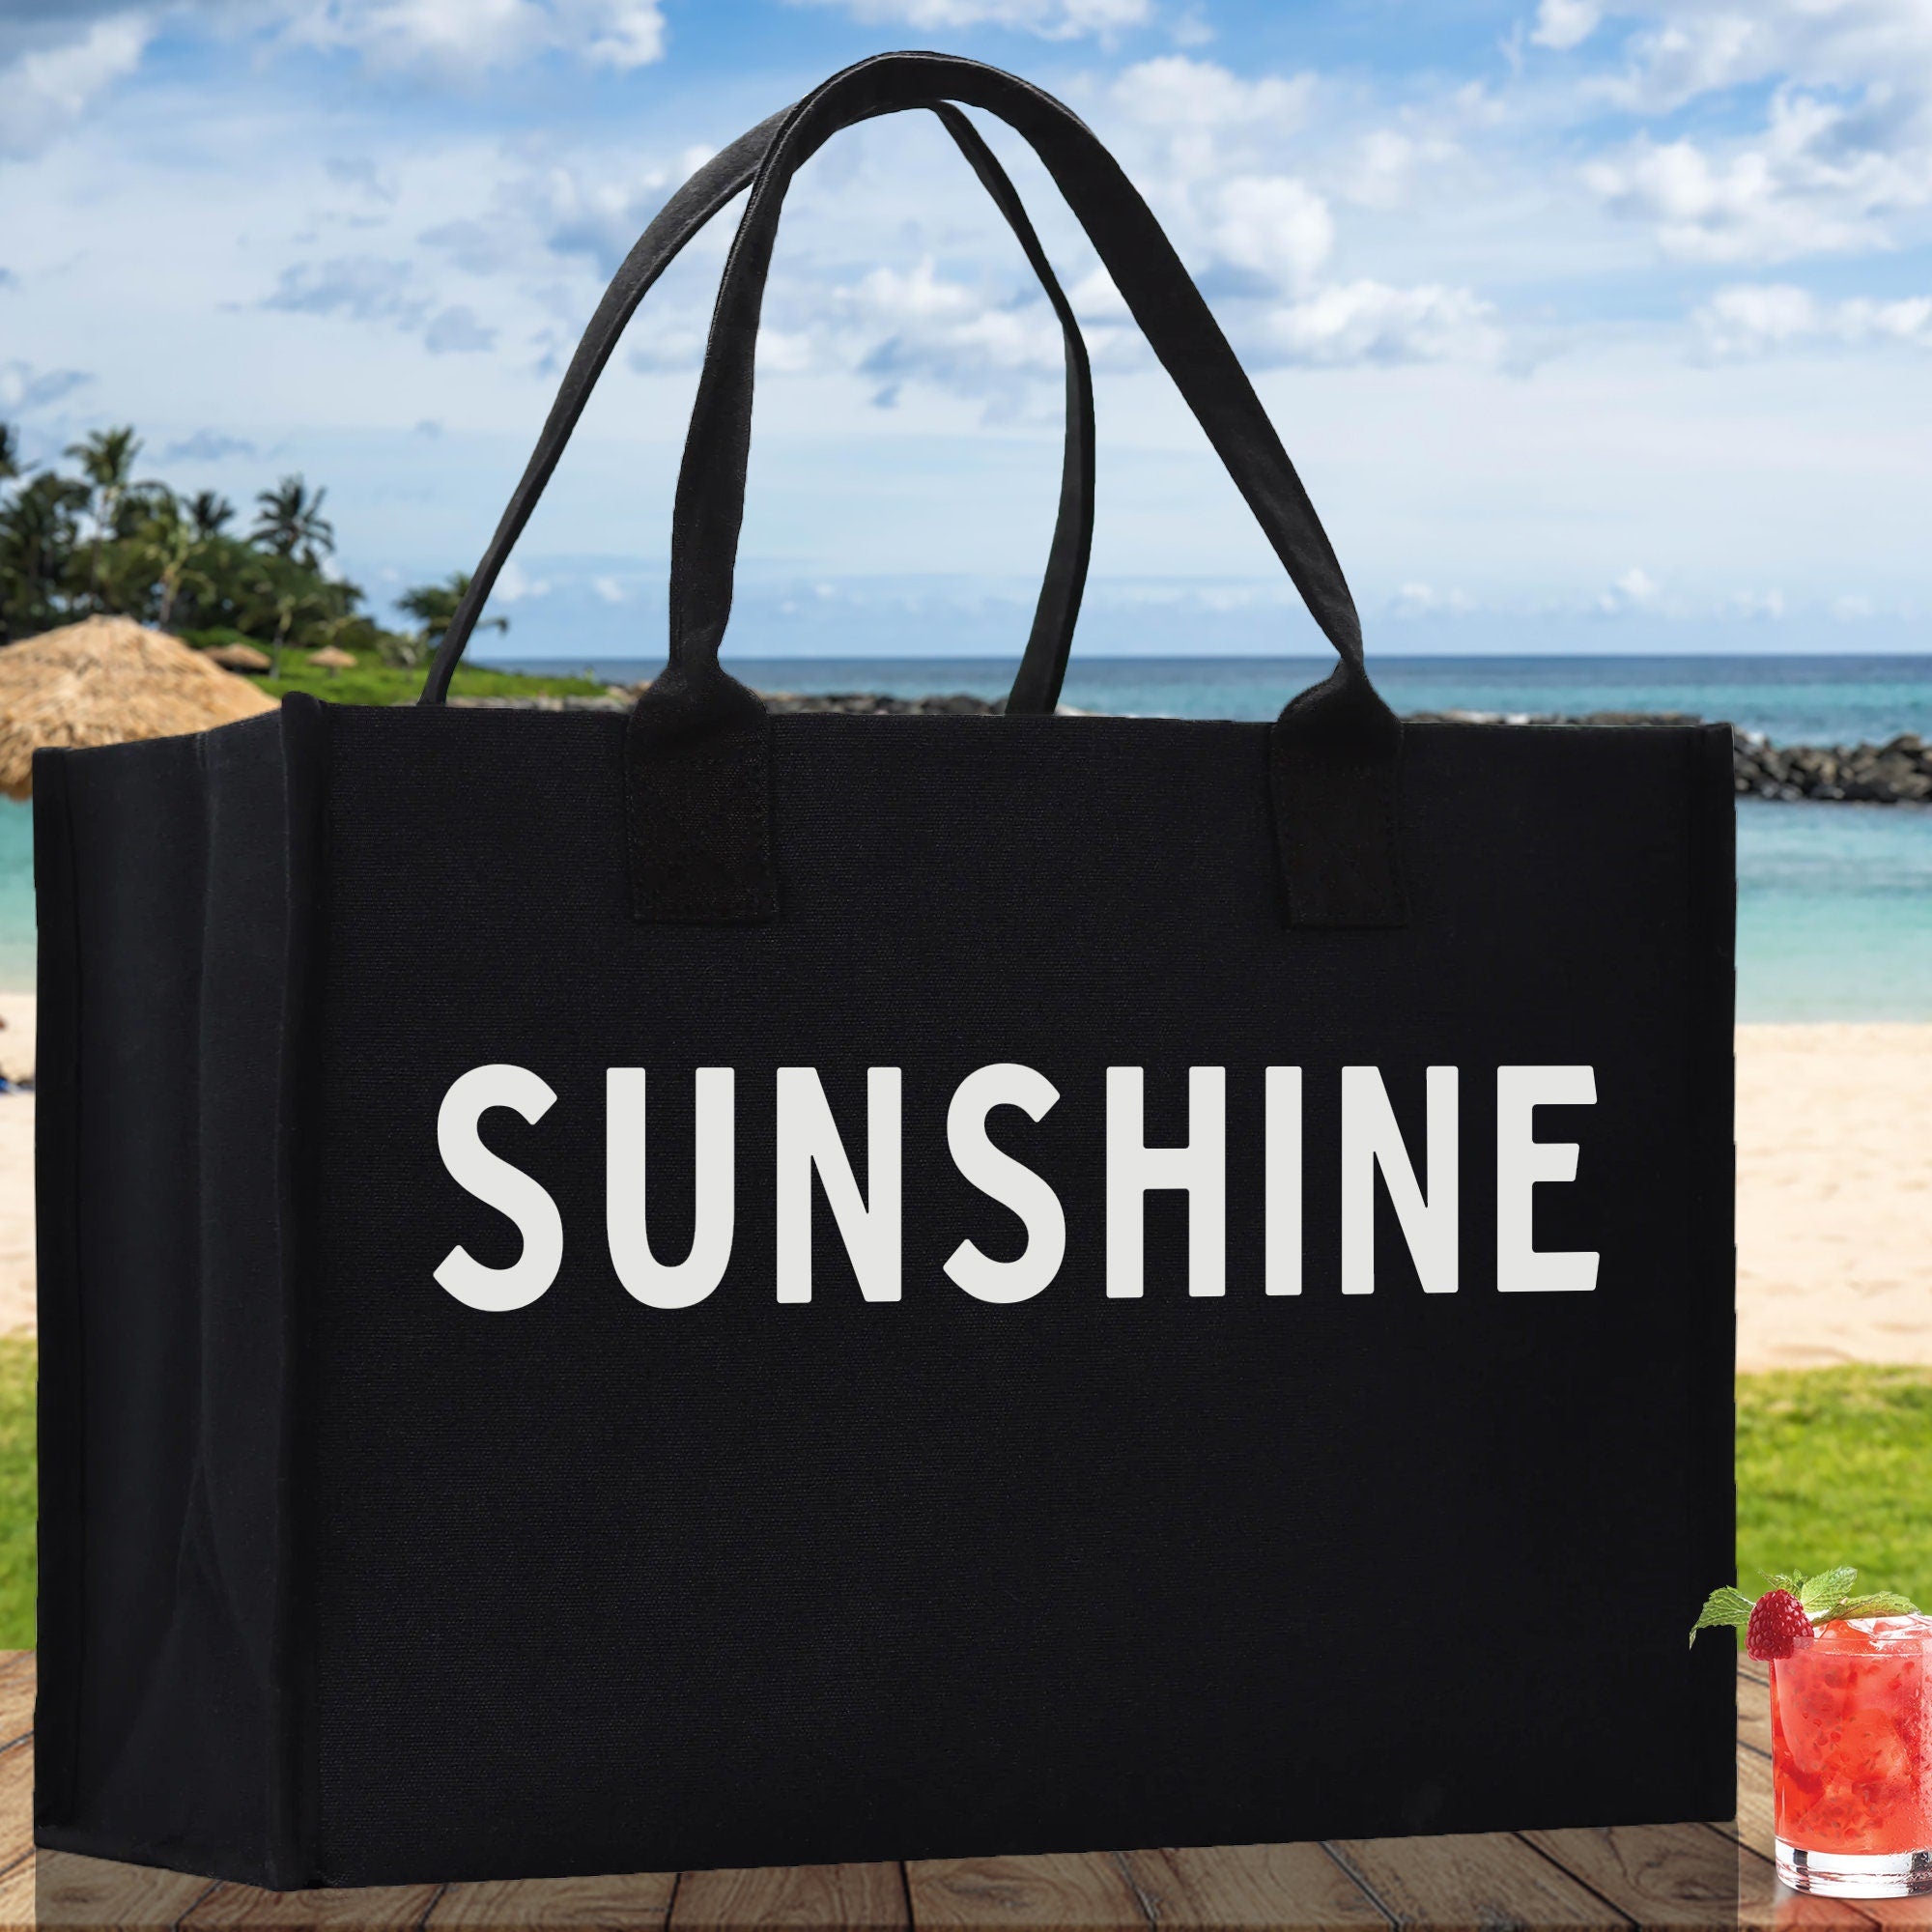 Sunshine Cotton Canvas Chic Beach Tote Bag Multipurpose Tote Weekender Tote Gift for Her Outdoor Tote Vacation Tote Large Beach Bag